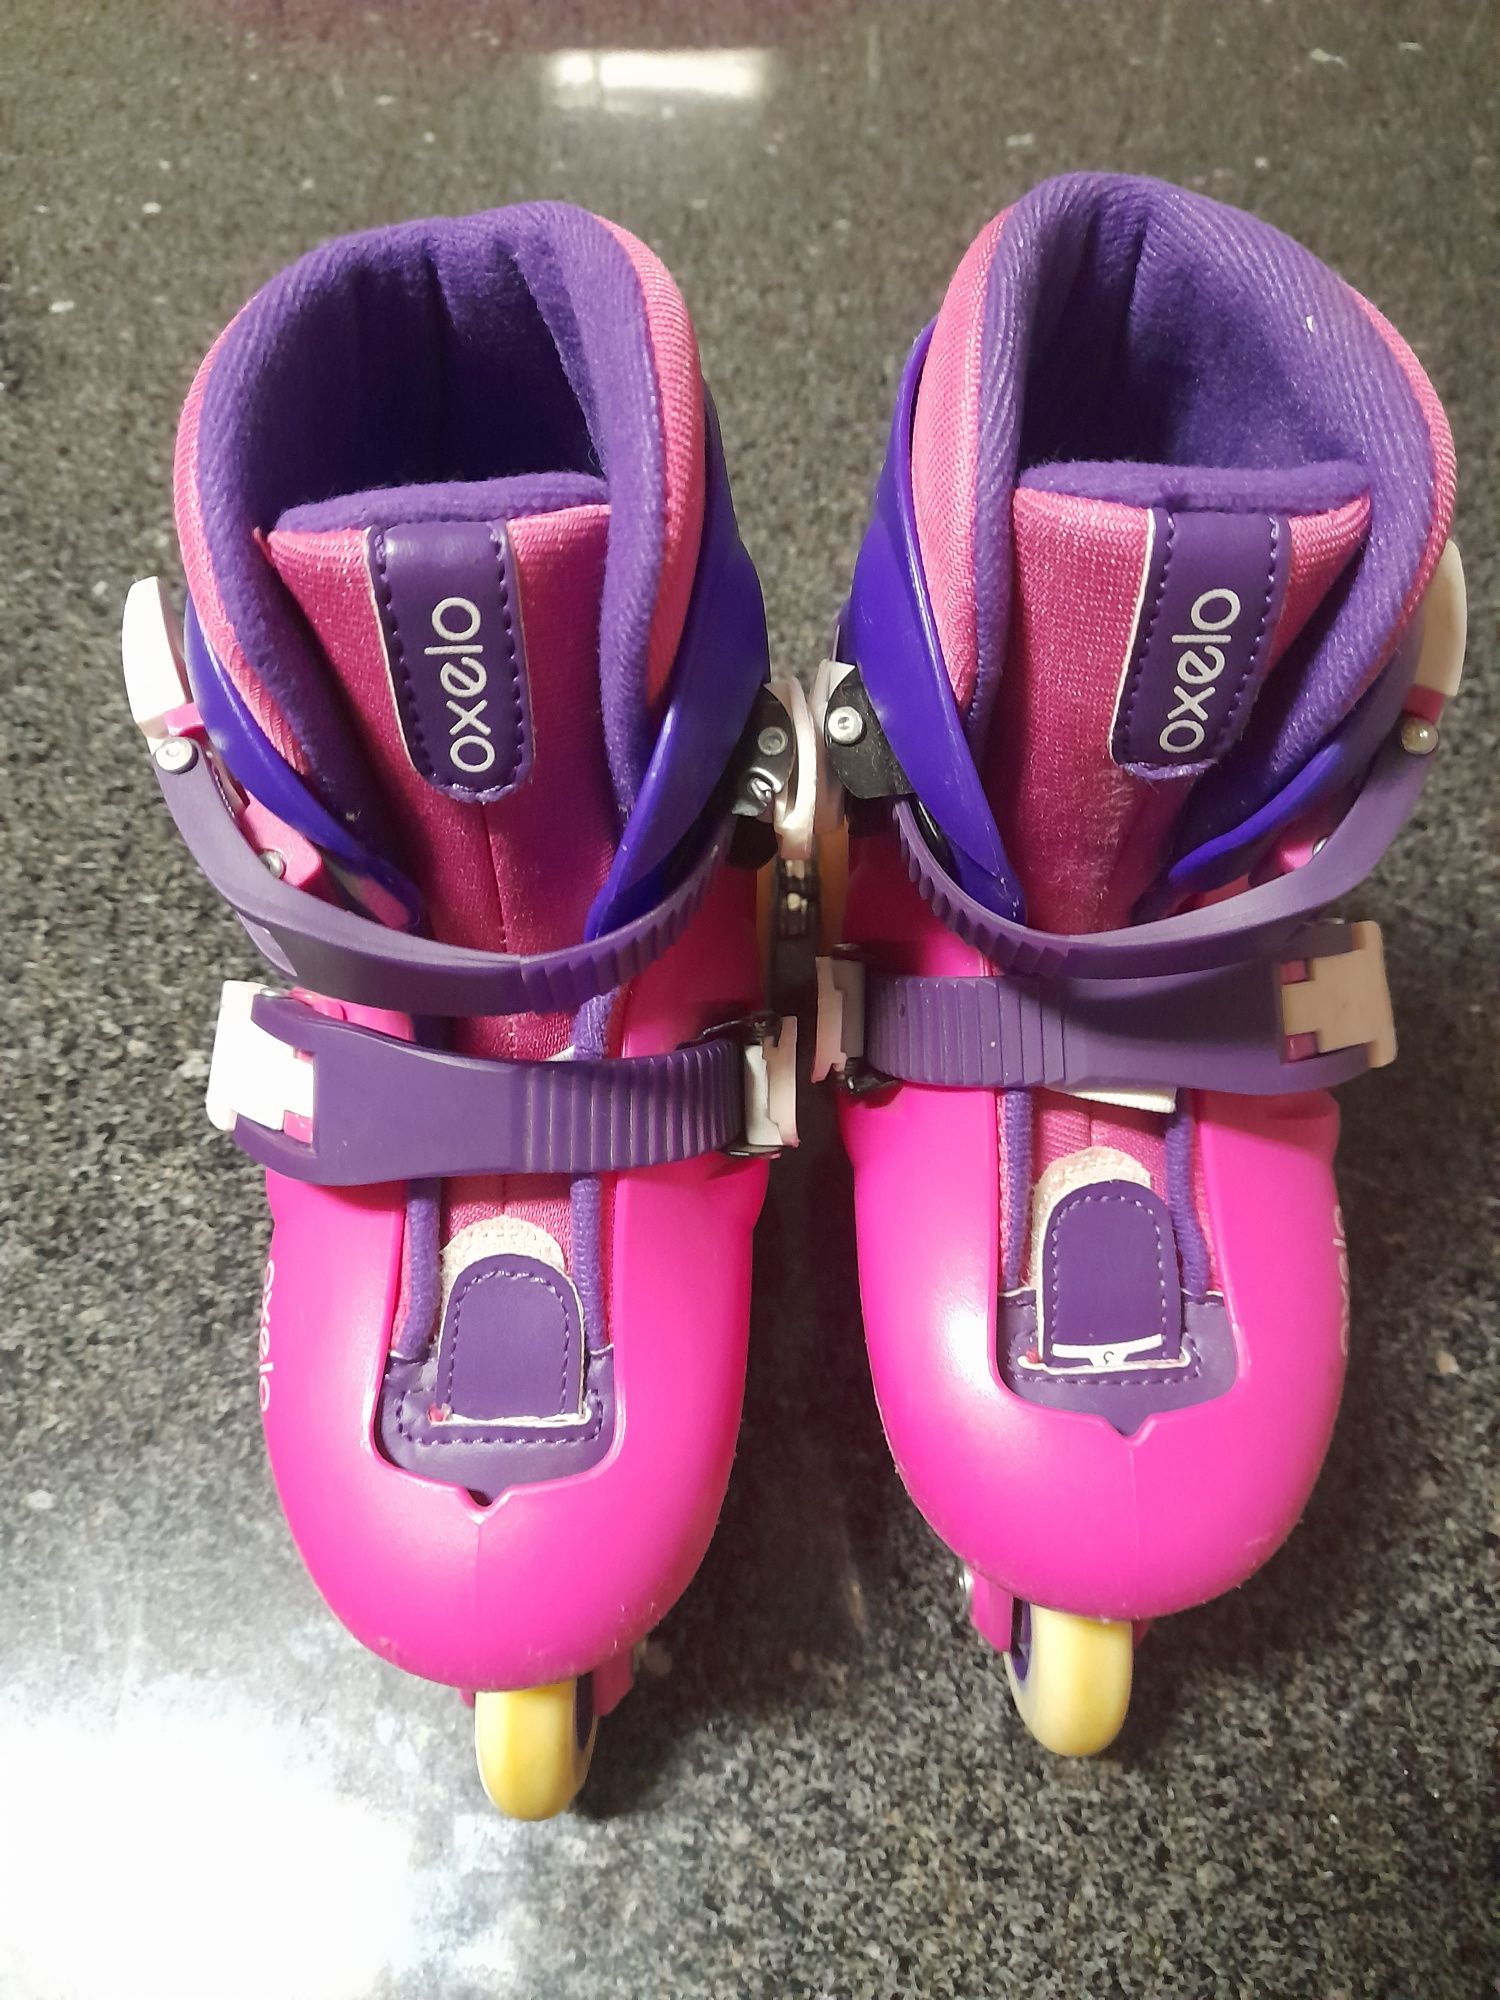 Patins oxelo 26-28